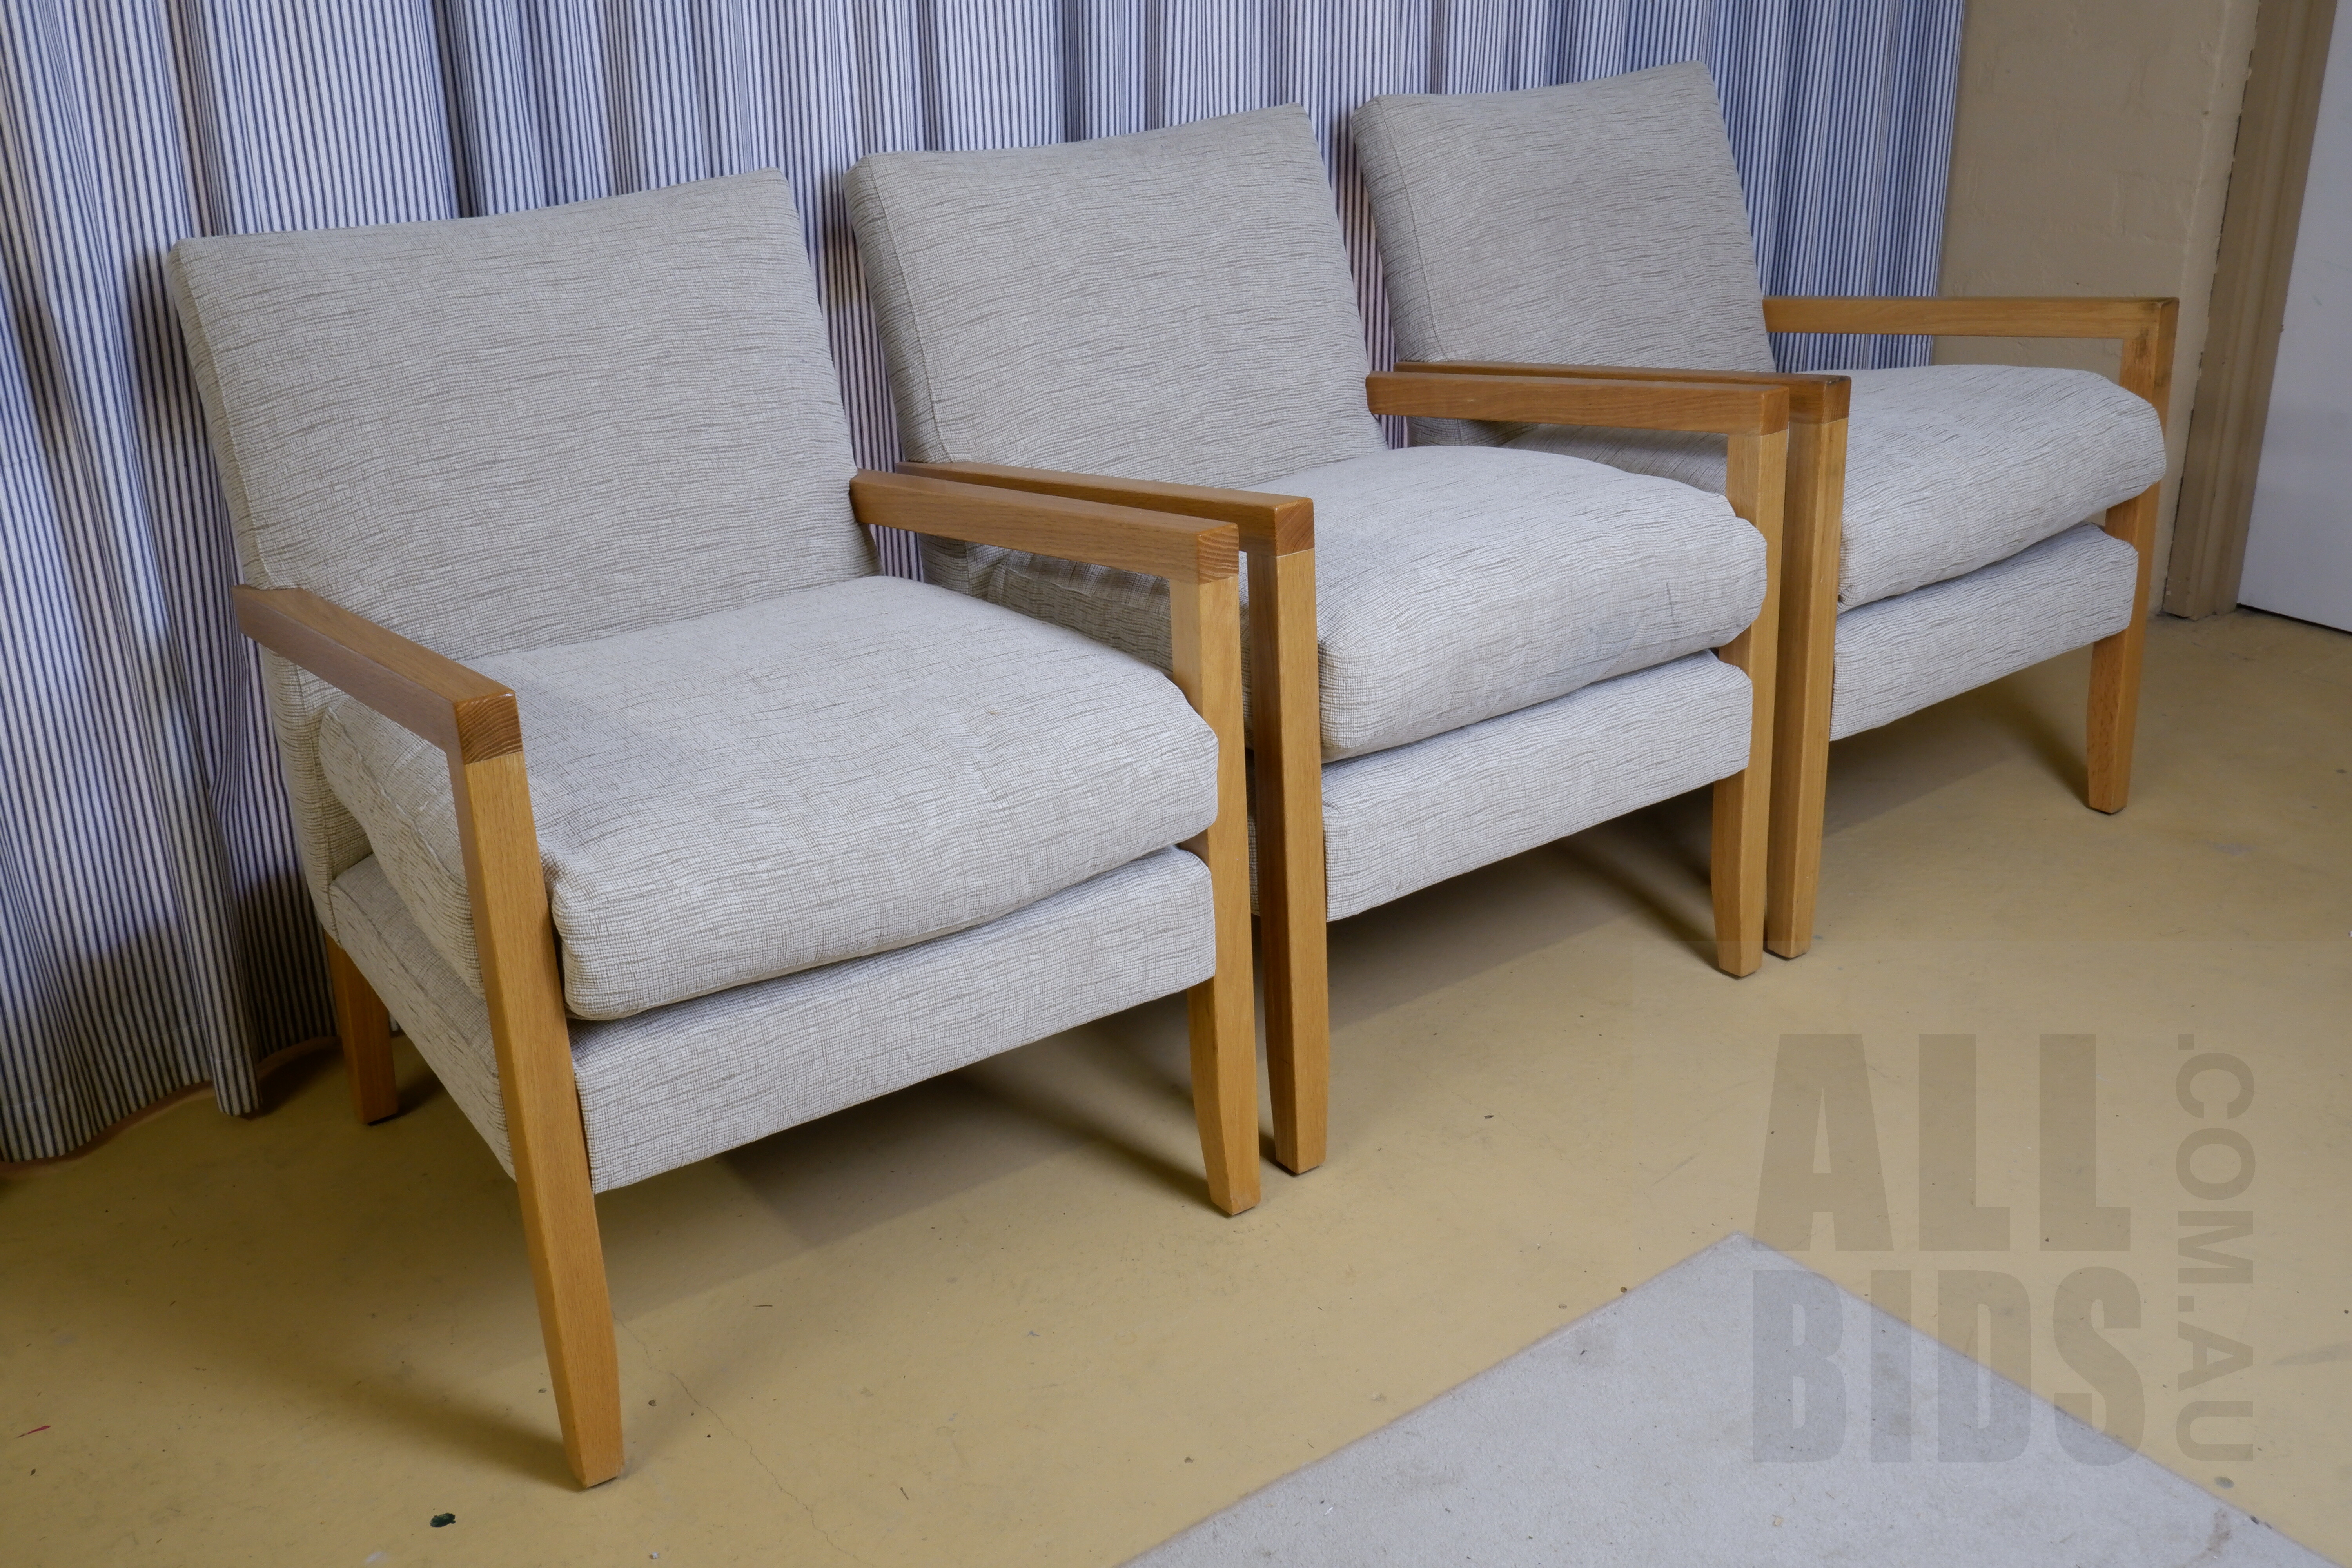 'Three Contemporary Ash Framed Armchairs'